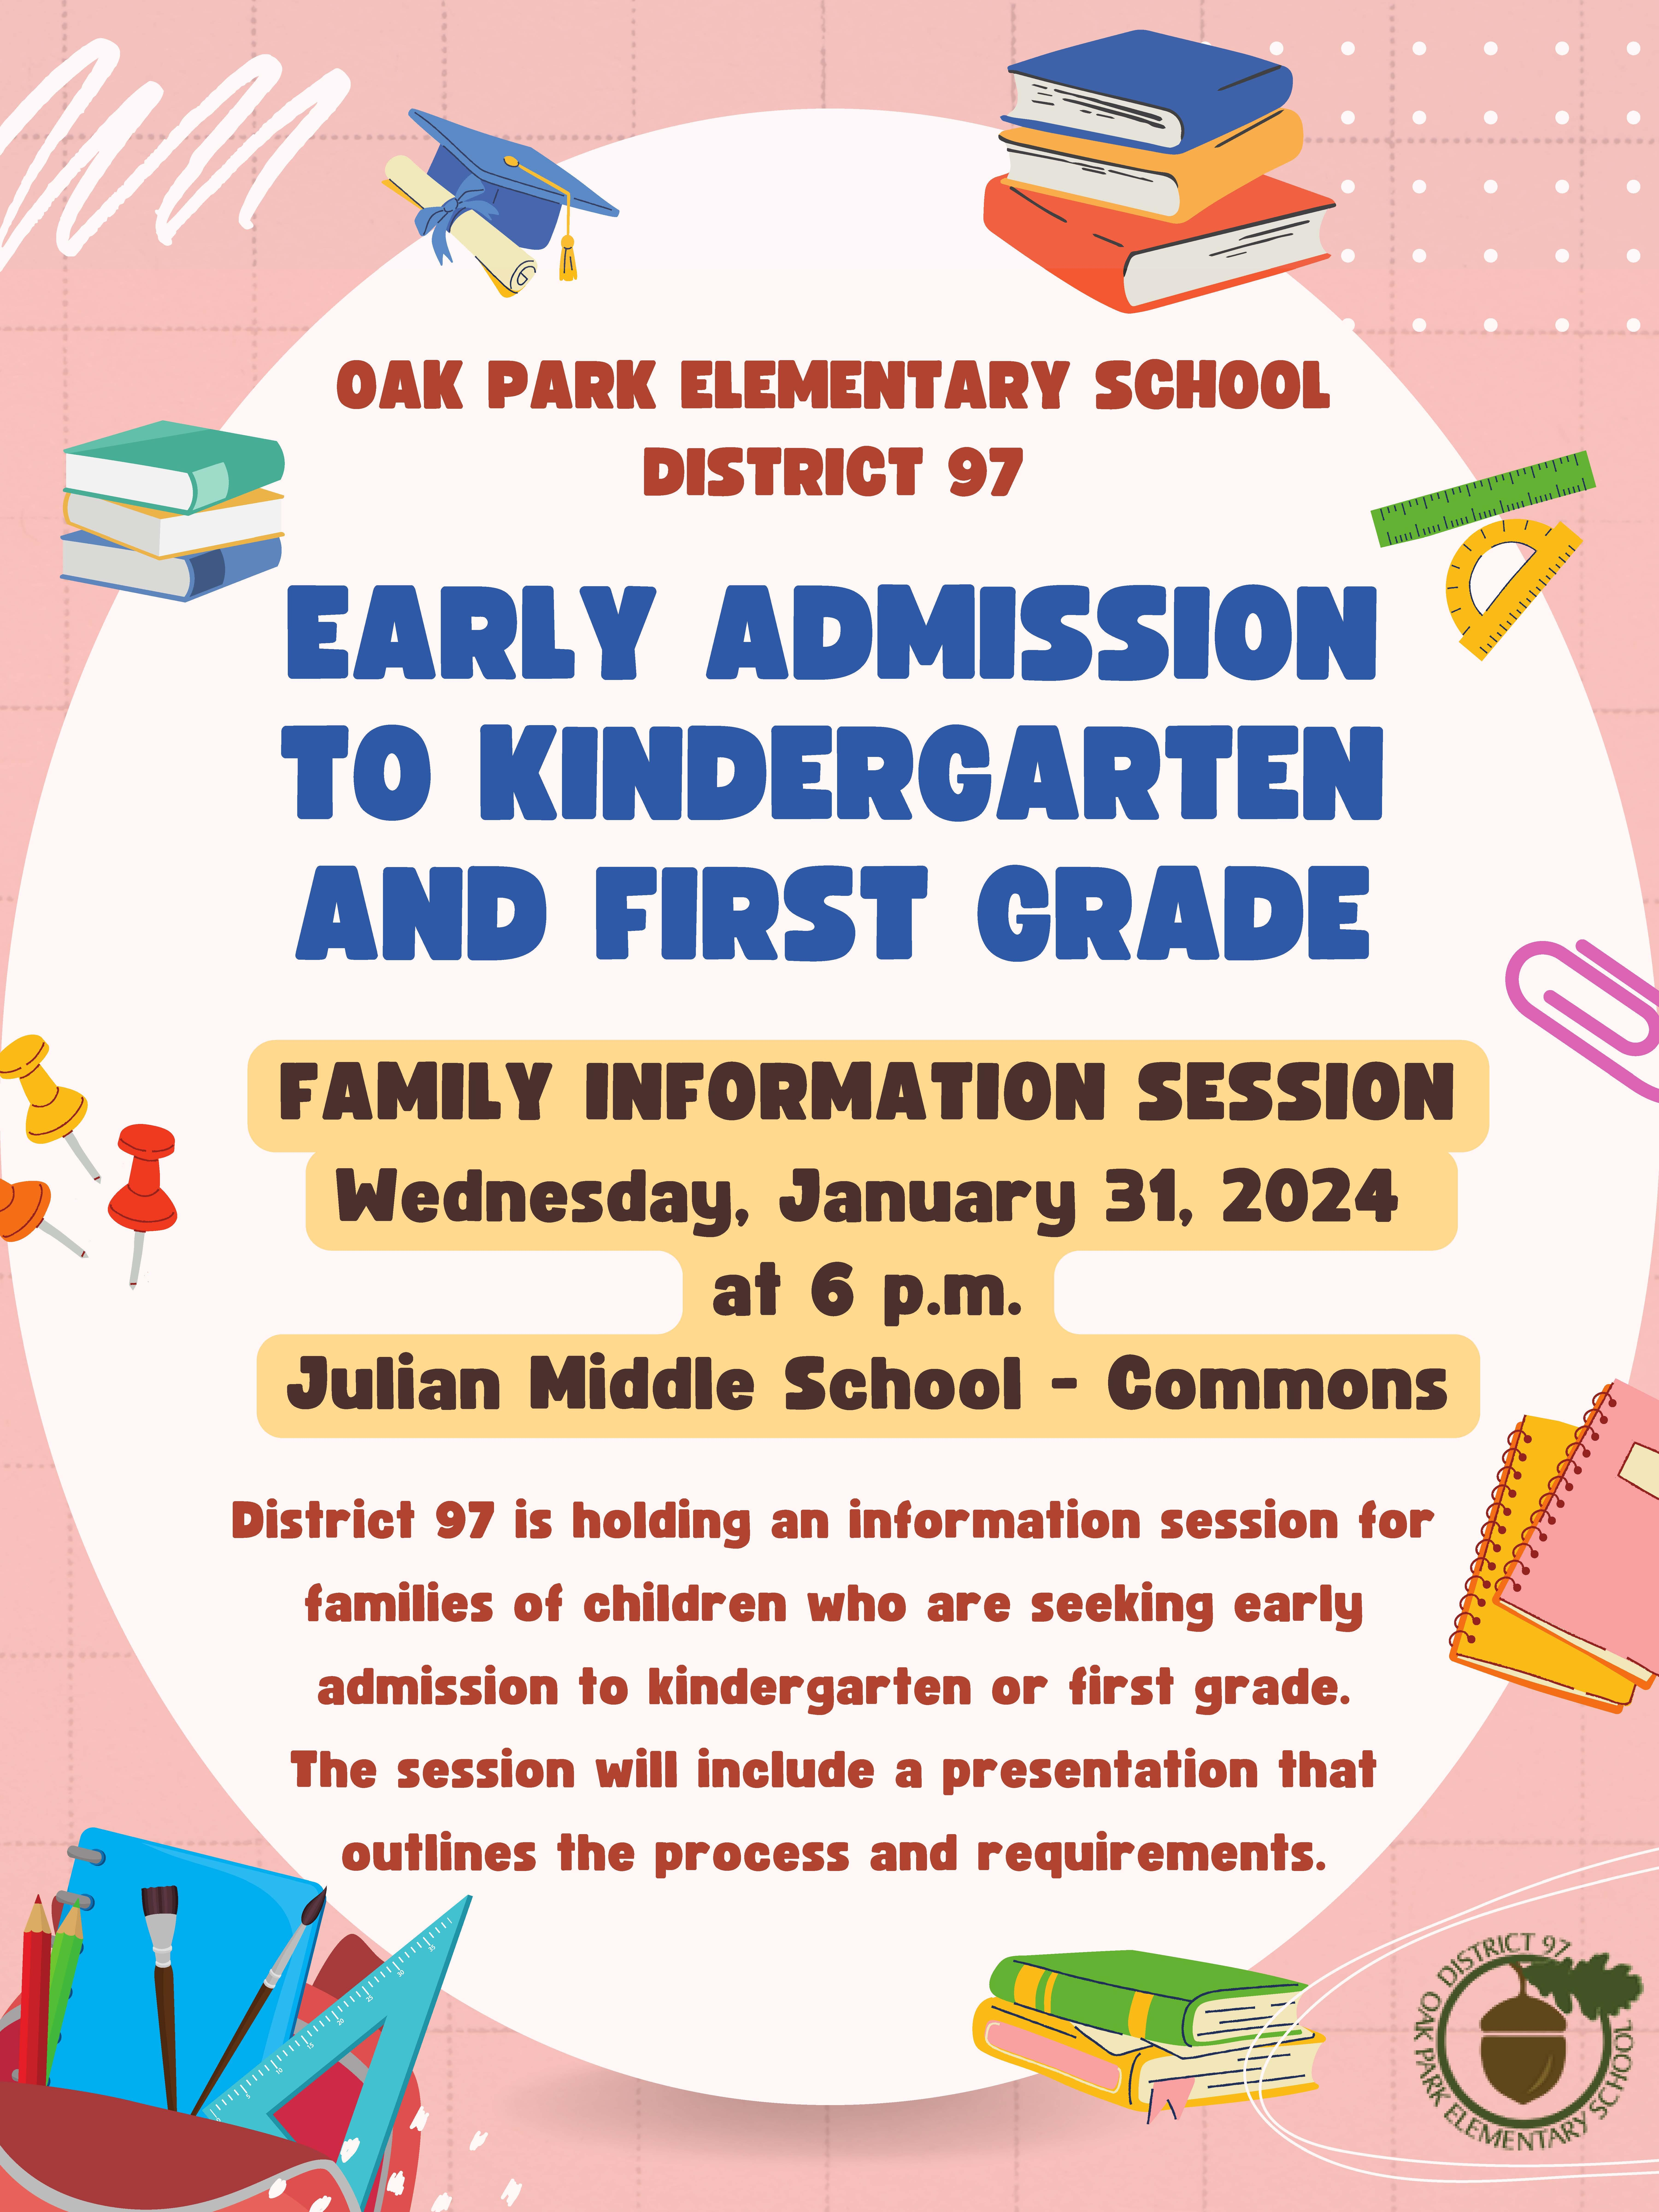 Early Admission to Kindergarten & First Grade Information Session details